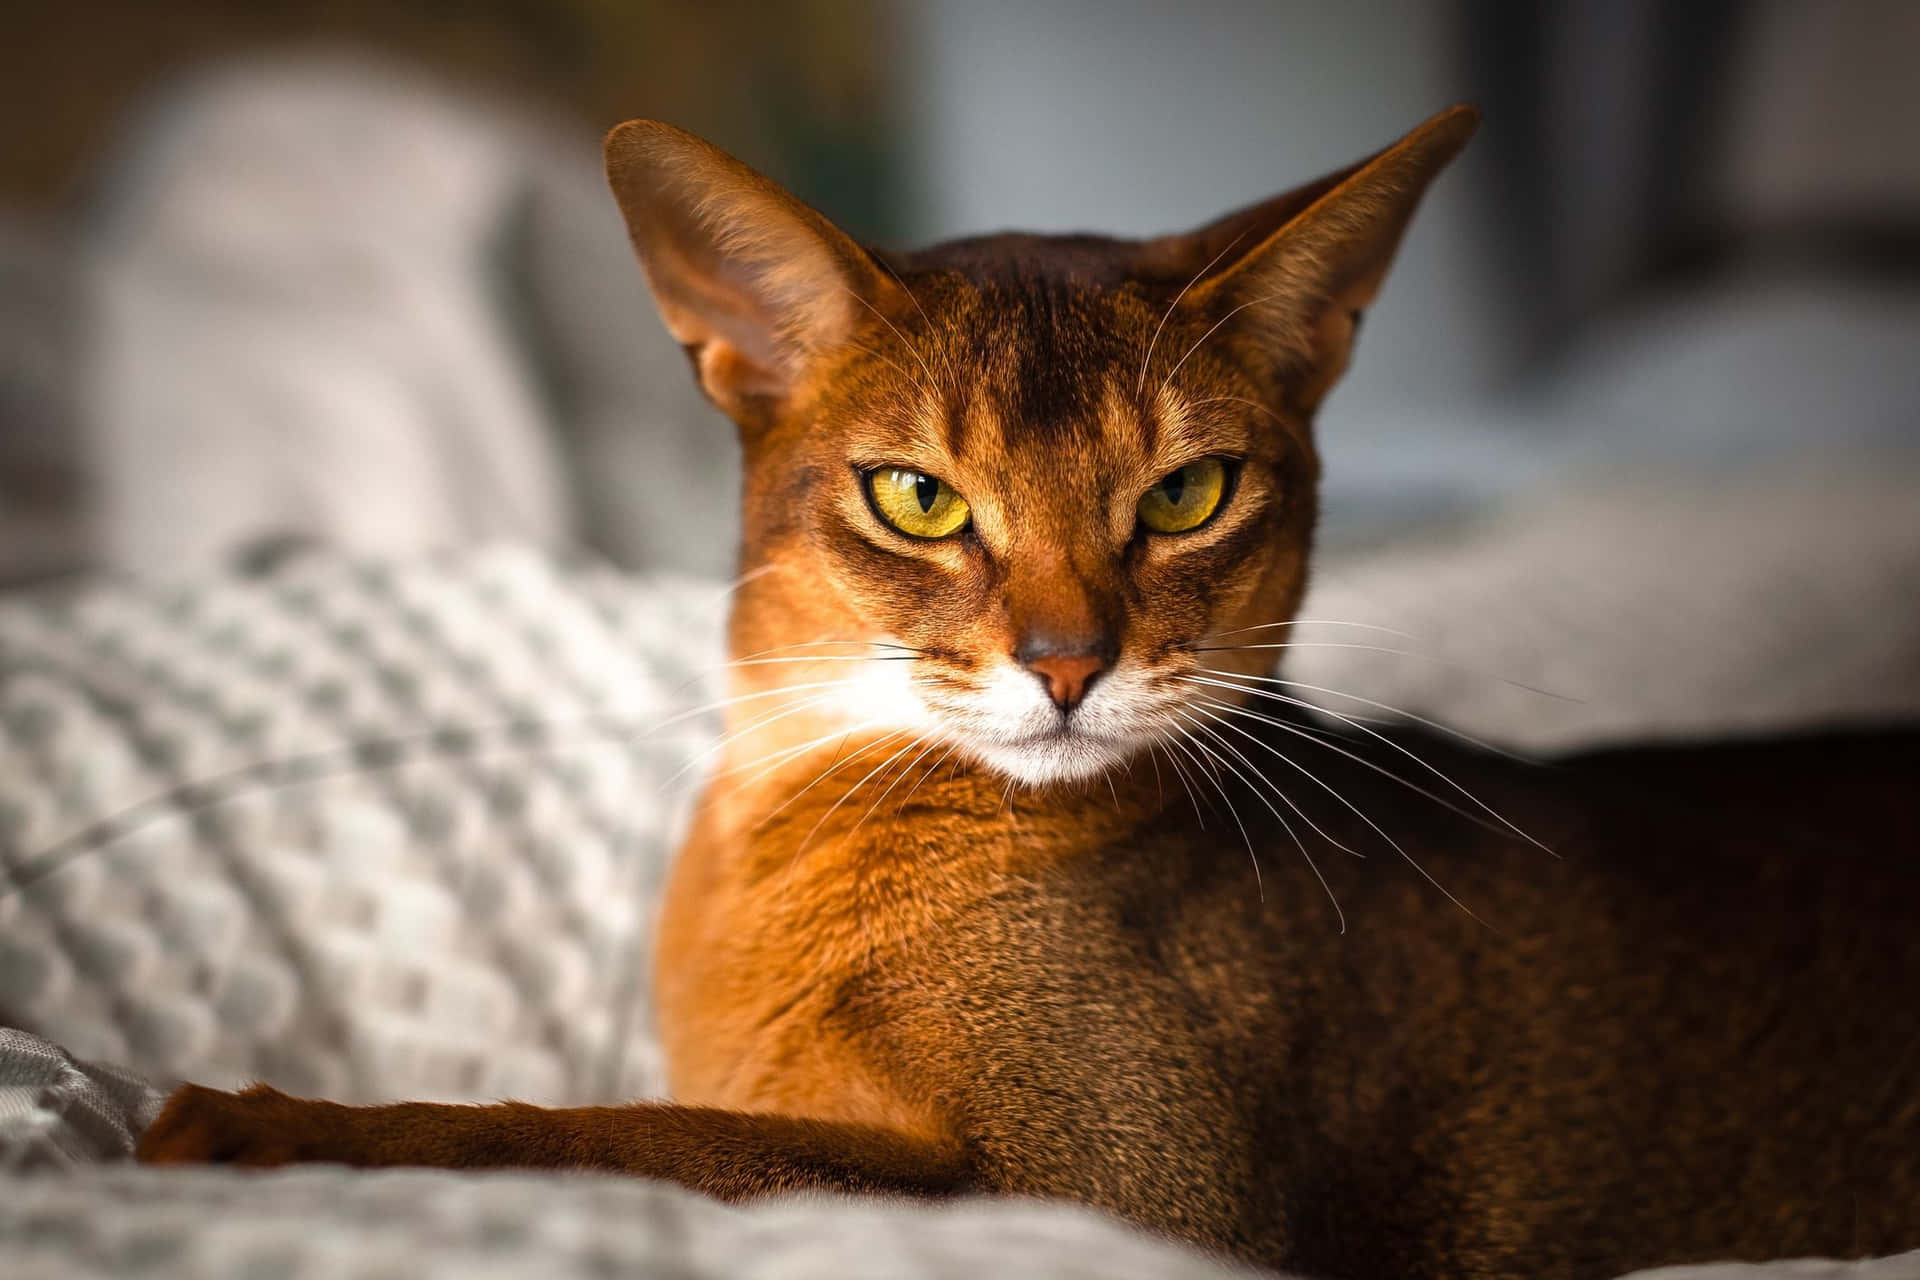 An elegant Abyssinian cat with golden fur gazing intently Wallpaper